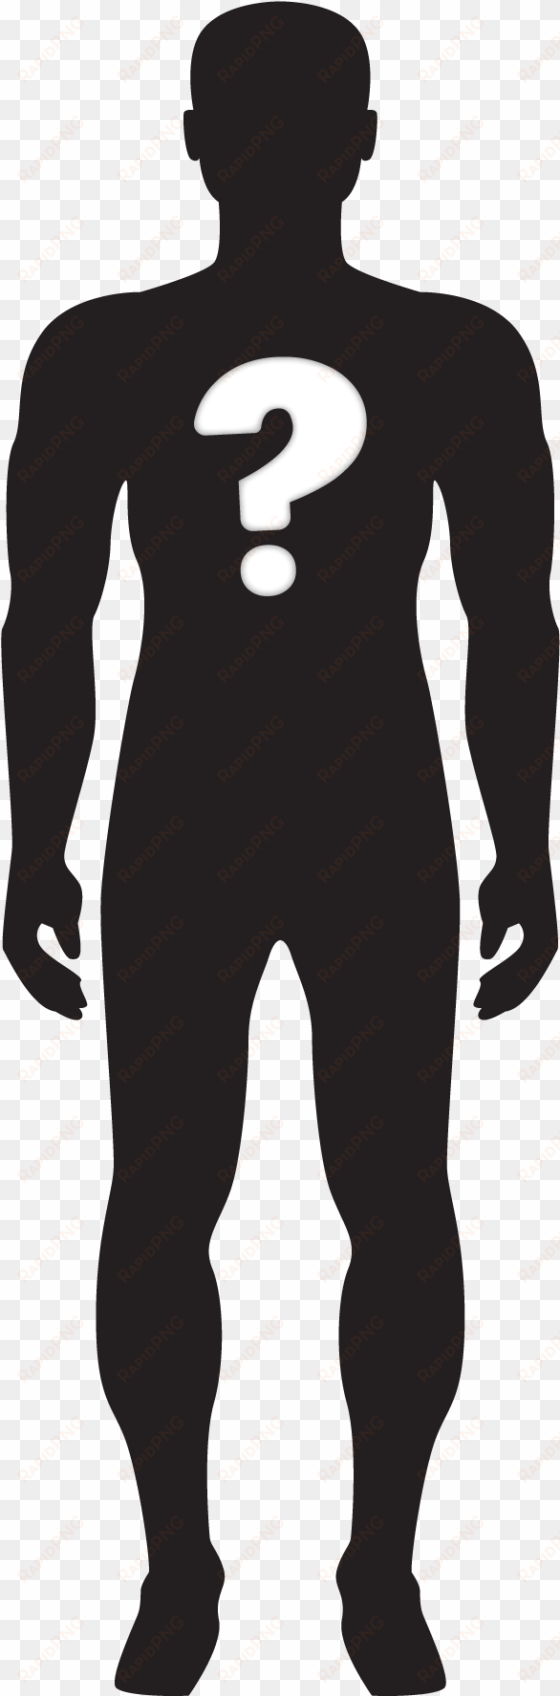 unknown human picture - black panther superhero silhouette